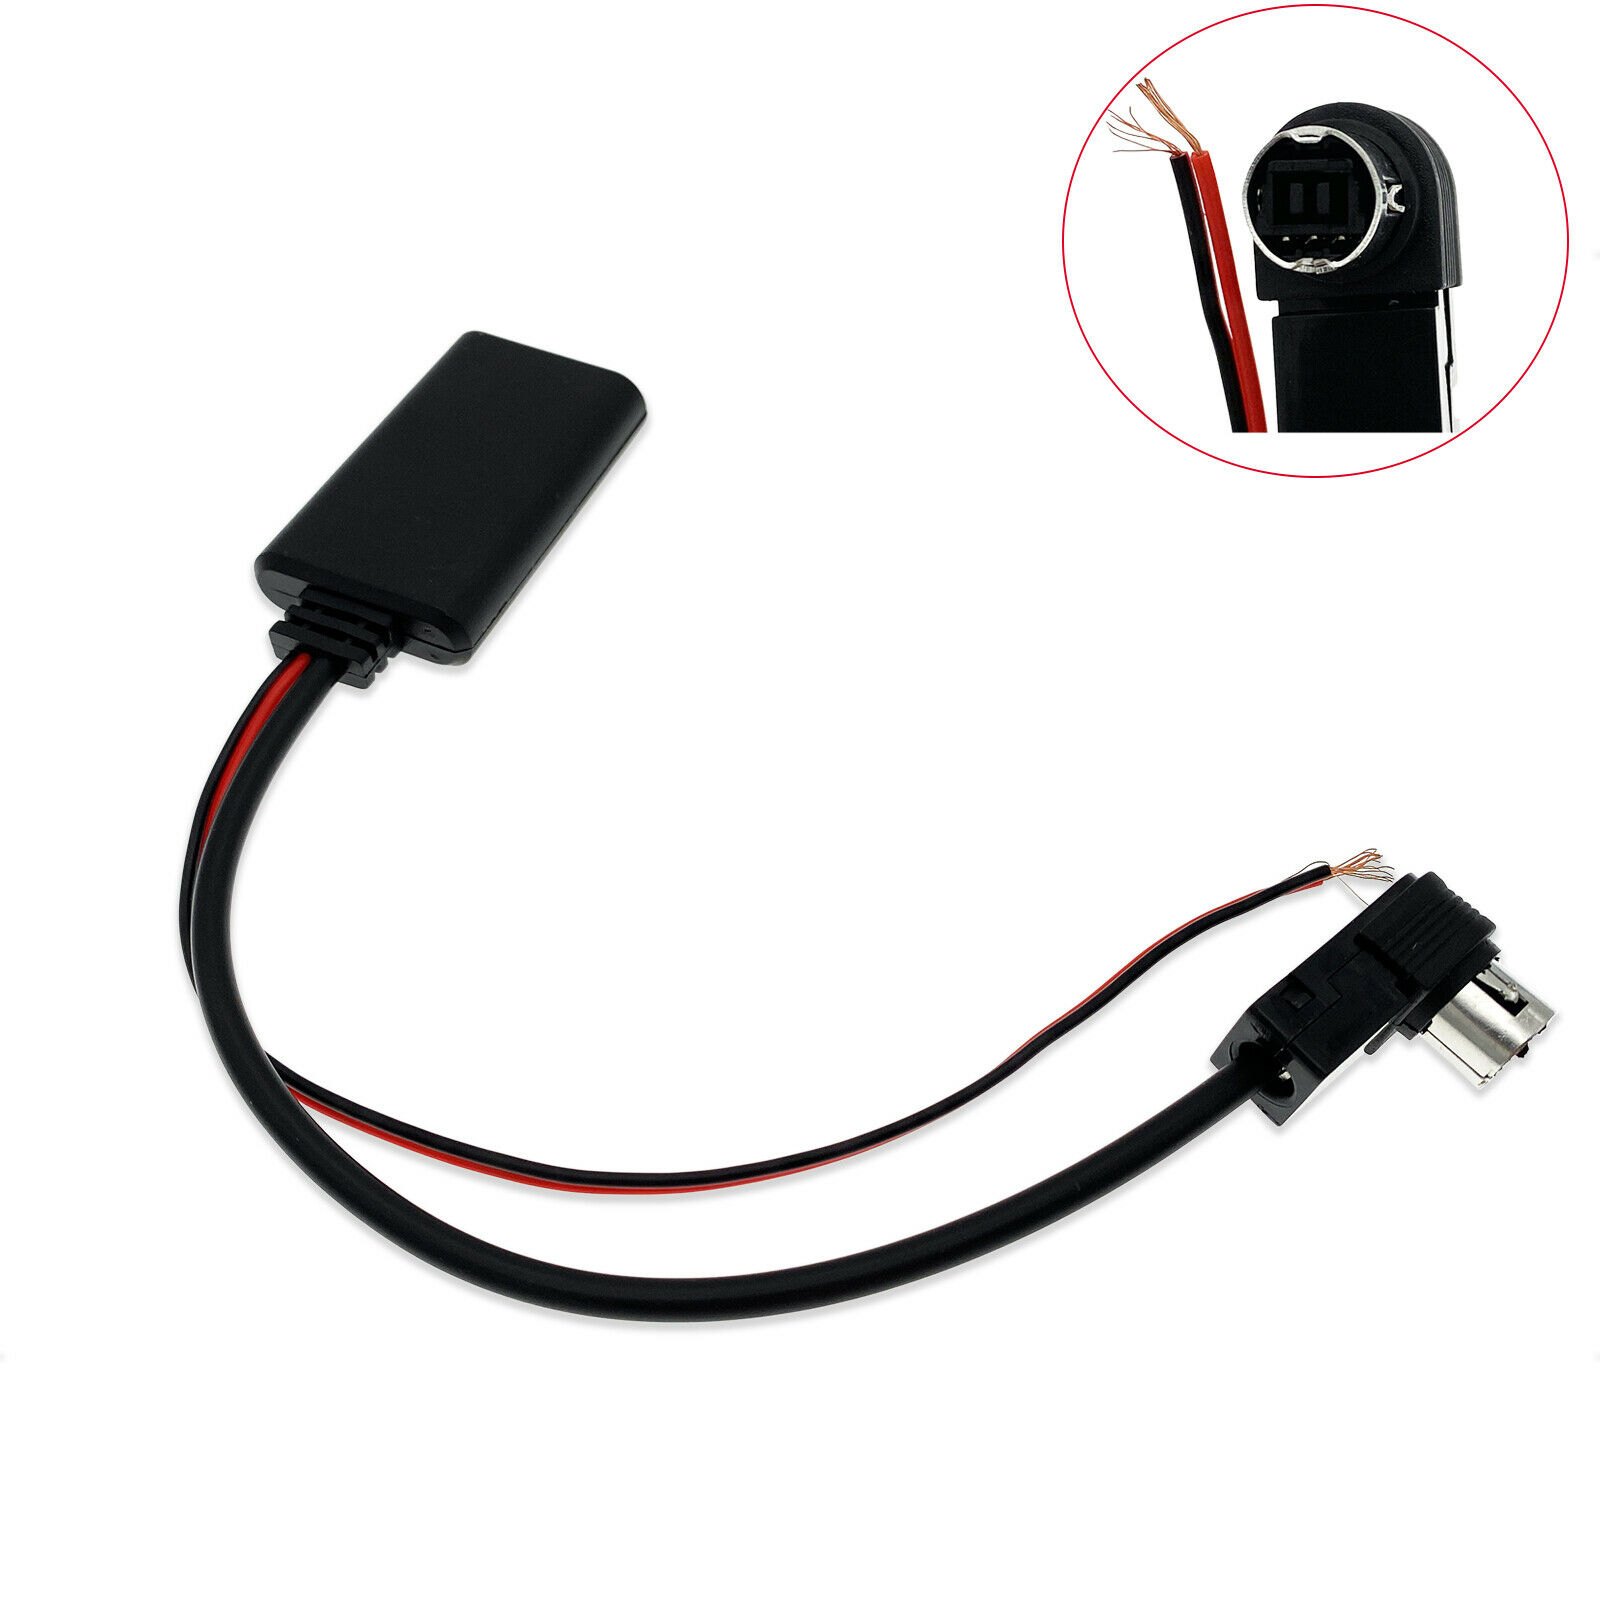 New For JVC KS-U5t, KS-U58, PD100, U57, U29 Bluetooth Aux Adapter Cable - image 4 of 4